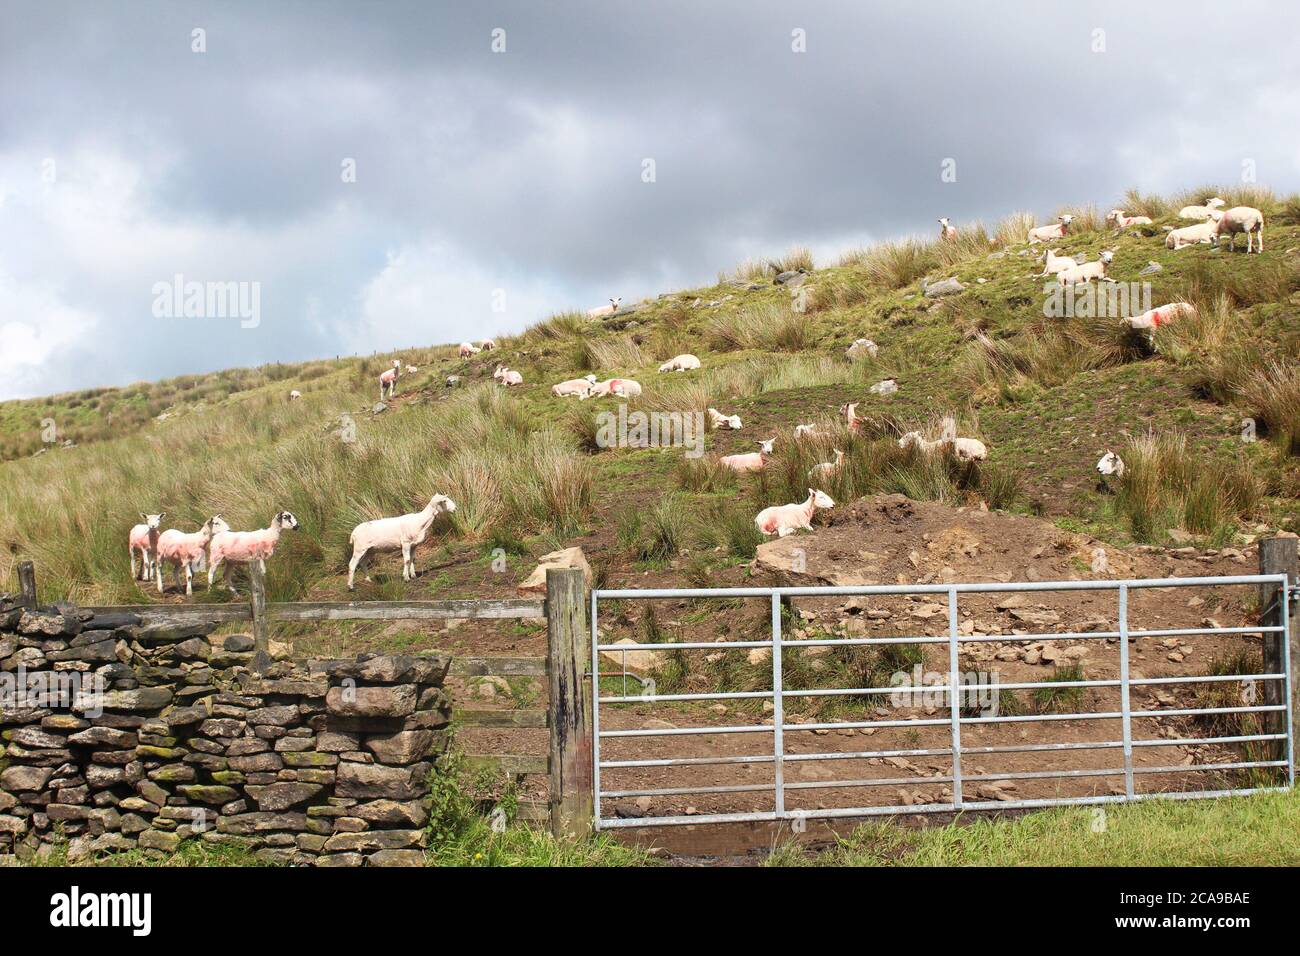 Red marked shaved sheep on an overgrown hilly field with dark clouds above in Anglezarke, Chorley, England Stock Photo